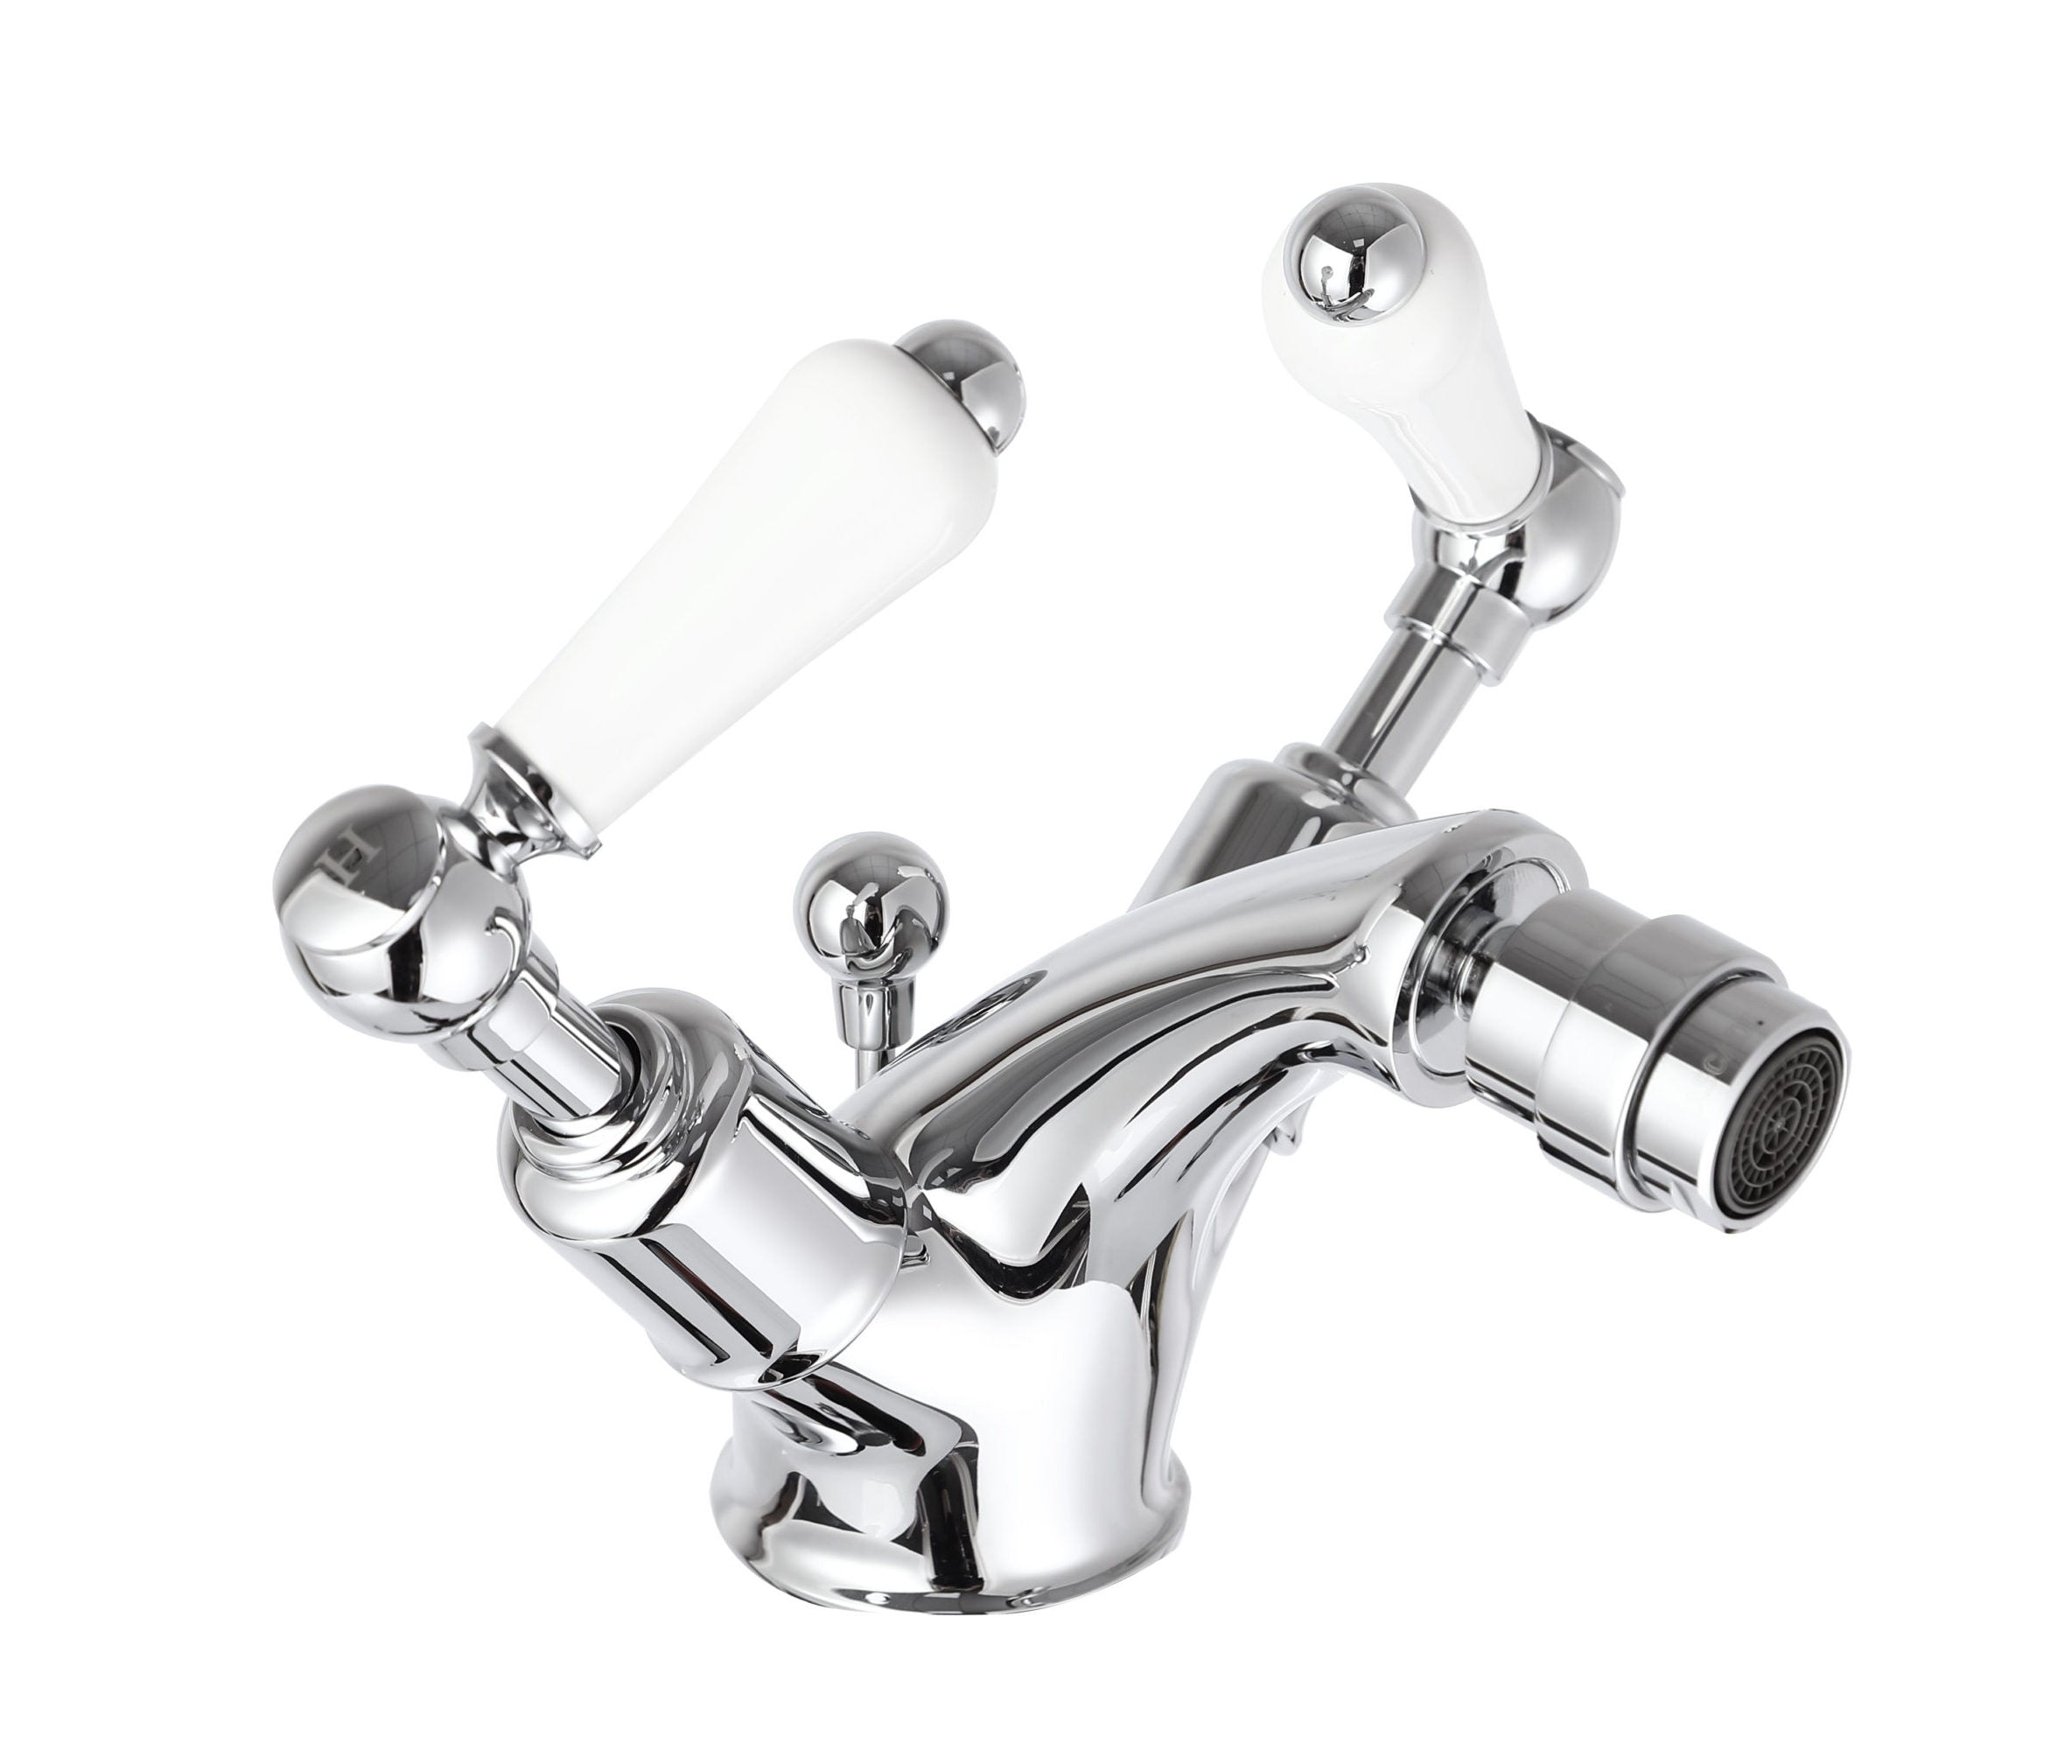 Traditional Bidet Mixer Tap with Pop Up Waste - Chrome Finish